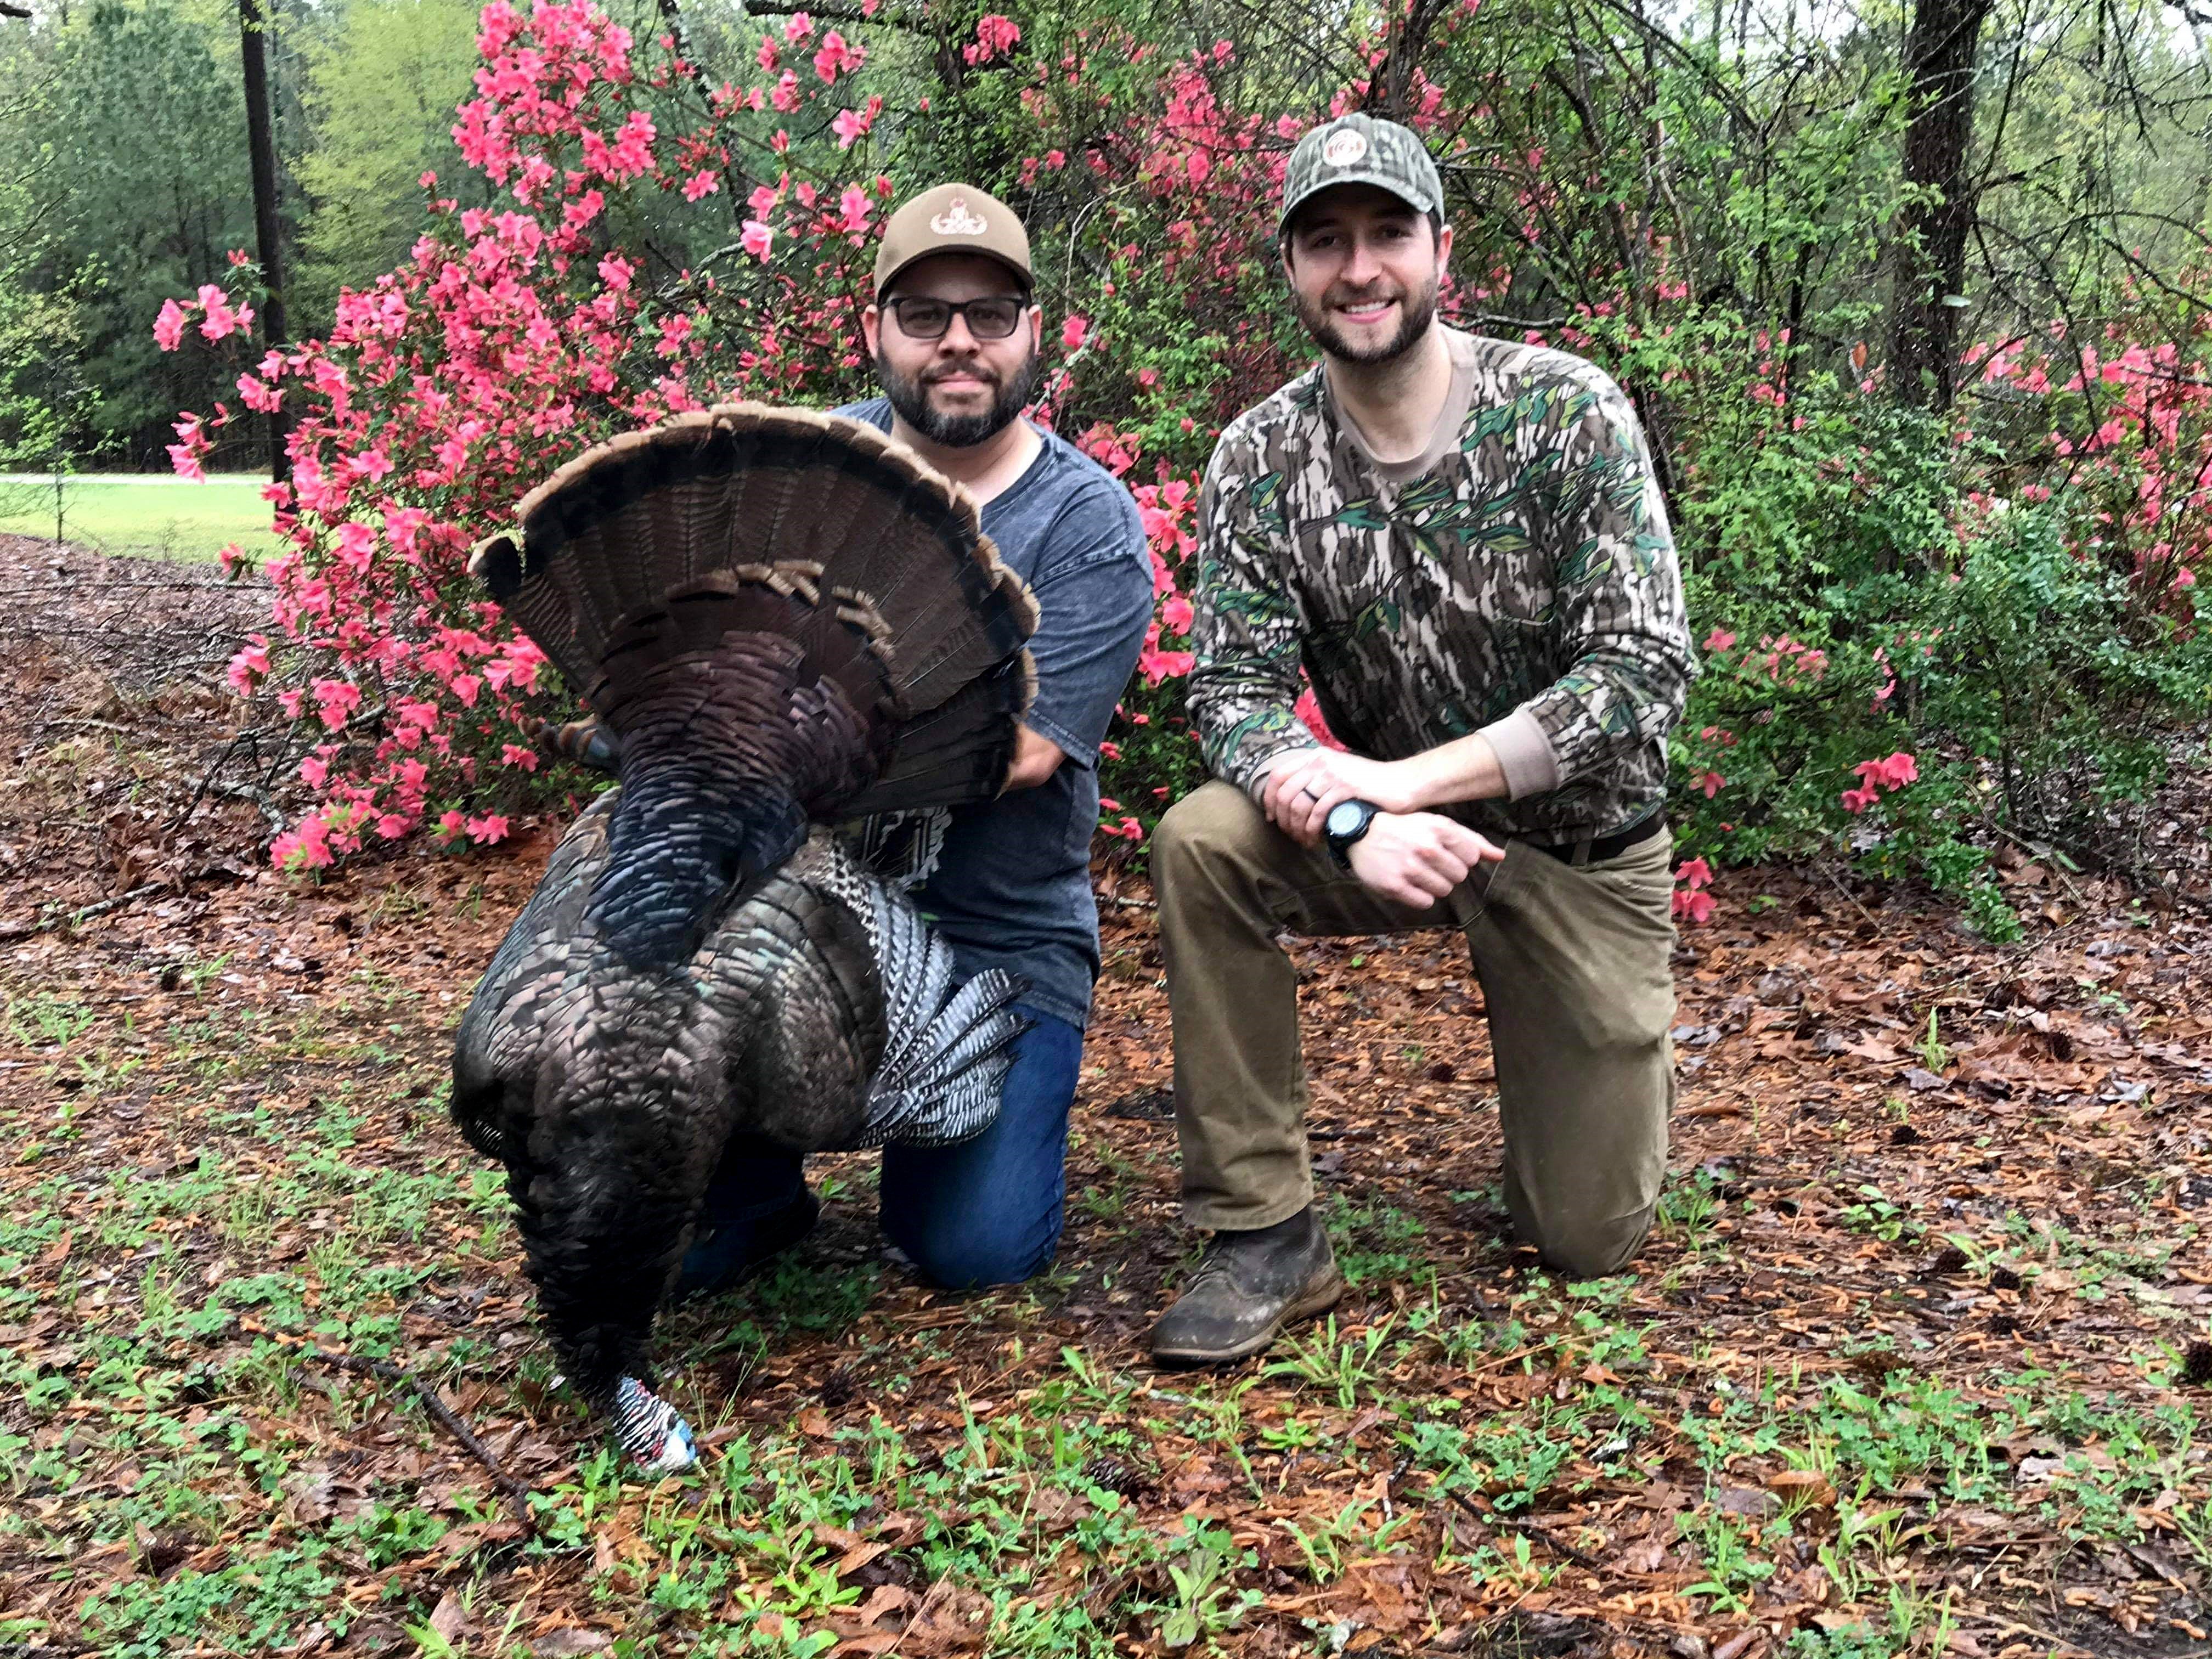 Jessie Barcala (left) harvested his first wild turkey with guidance from ADCNR hunting mentor Justin Grider (right).